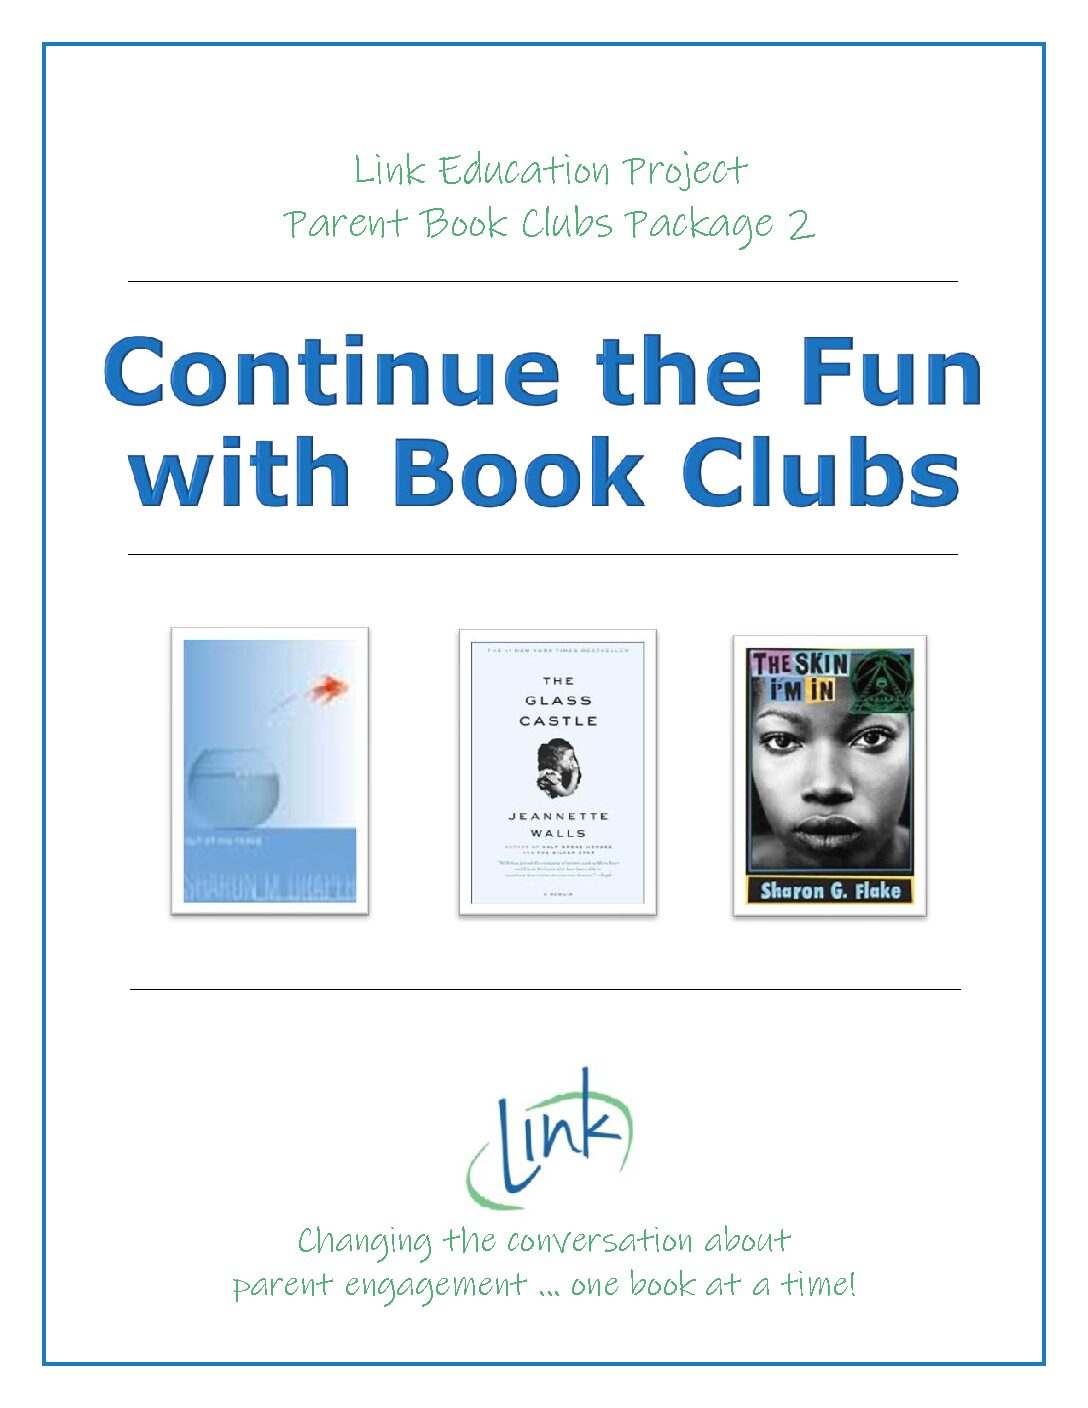 Continuing the Fun With Book Clubs